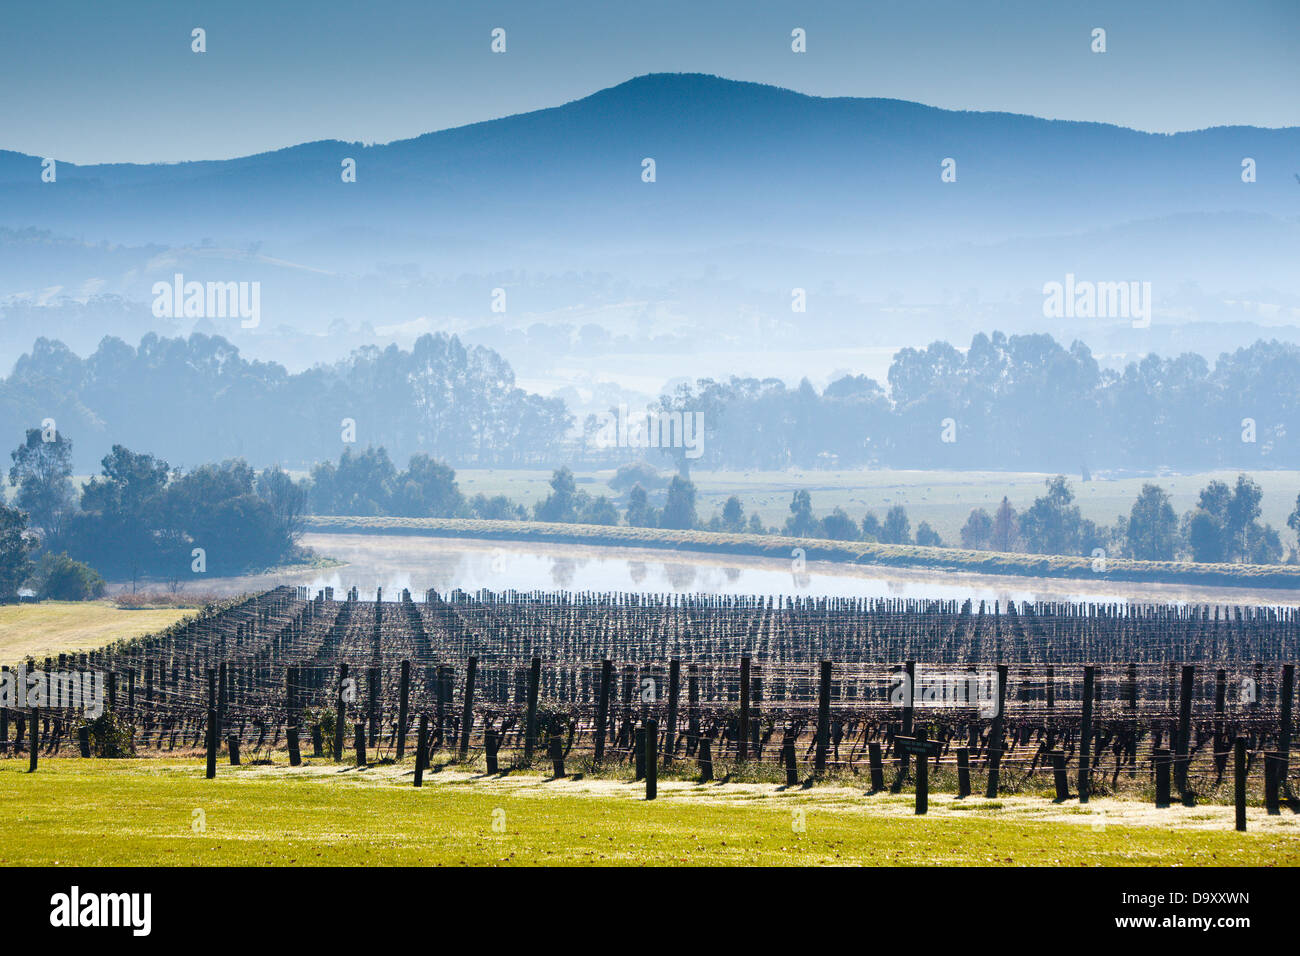 Domaine Chandon winery on a cold winter's morning in the Yarra Valley, Victoria, Australia Stock Photo